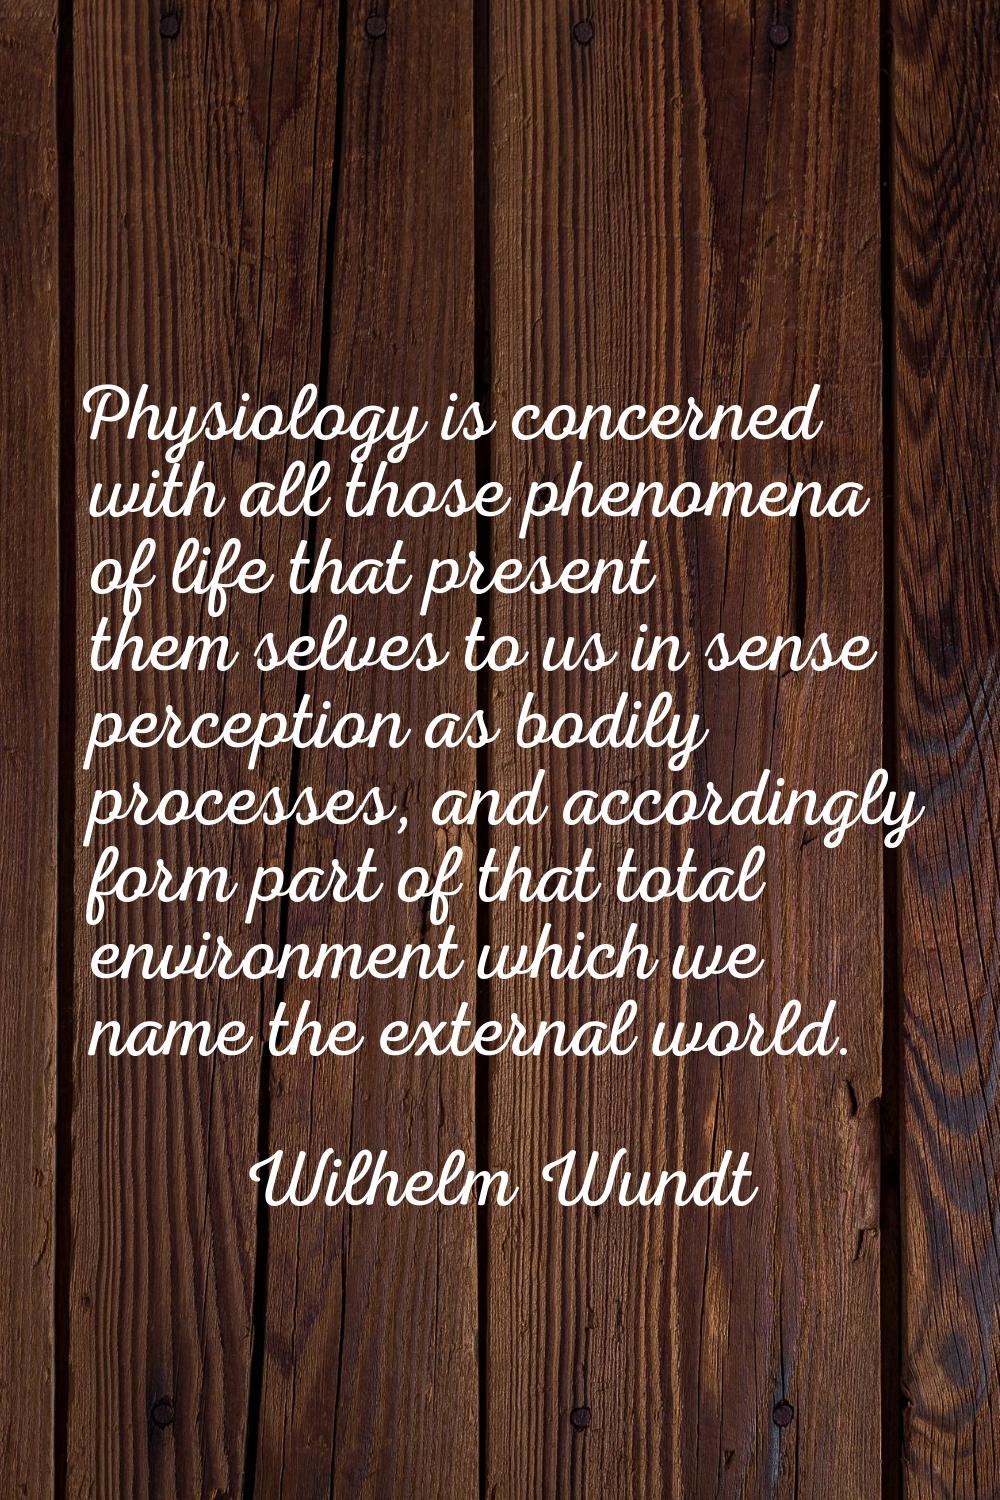 Physiology is concerned with all those phenomena of life that present them selves to us in sense pe